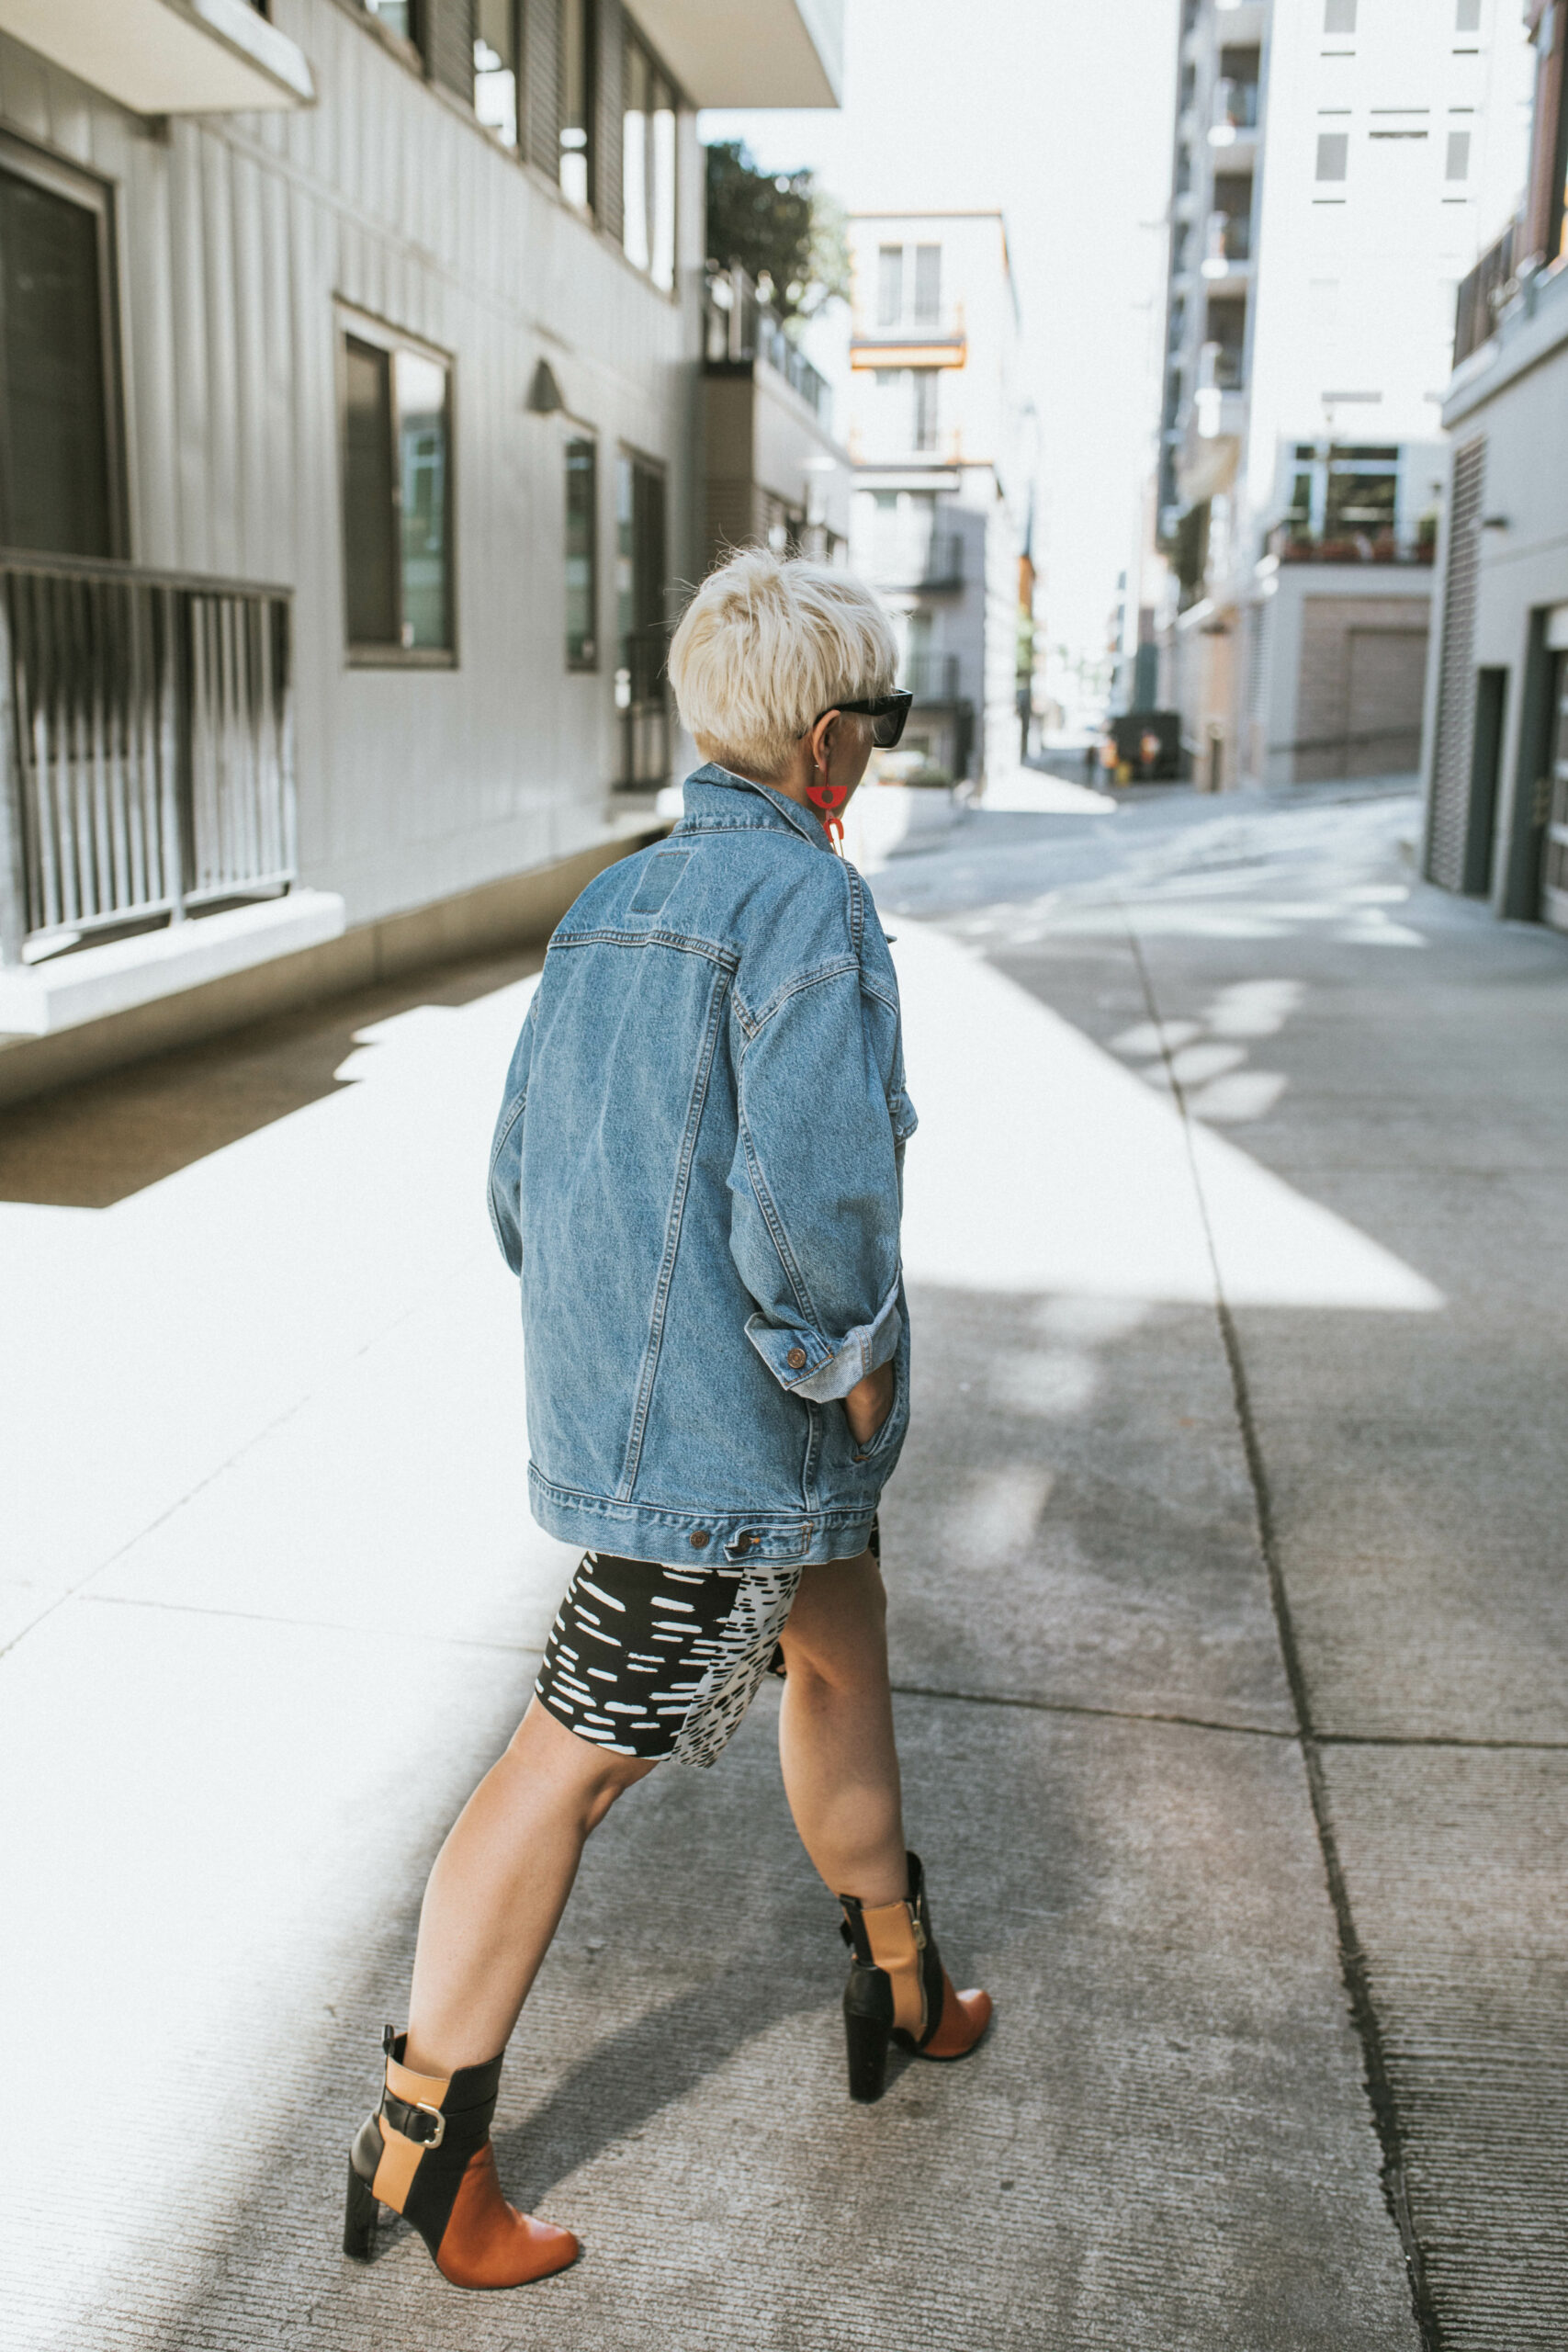 How to Wear Ankle Boots in Summertime - BloggerNotBillionaire.com